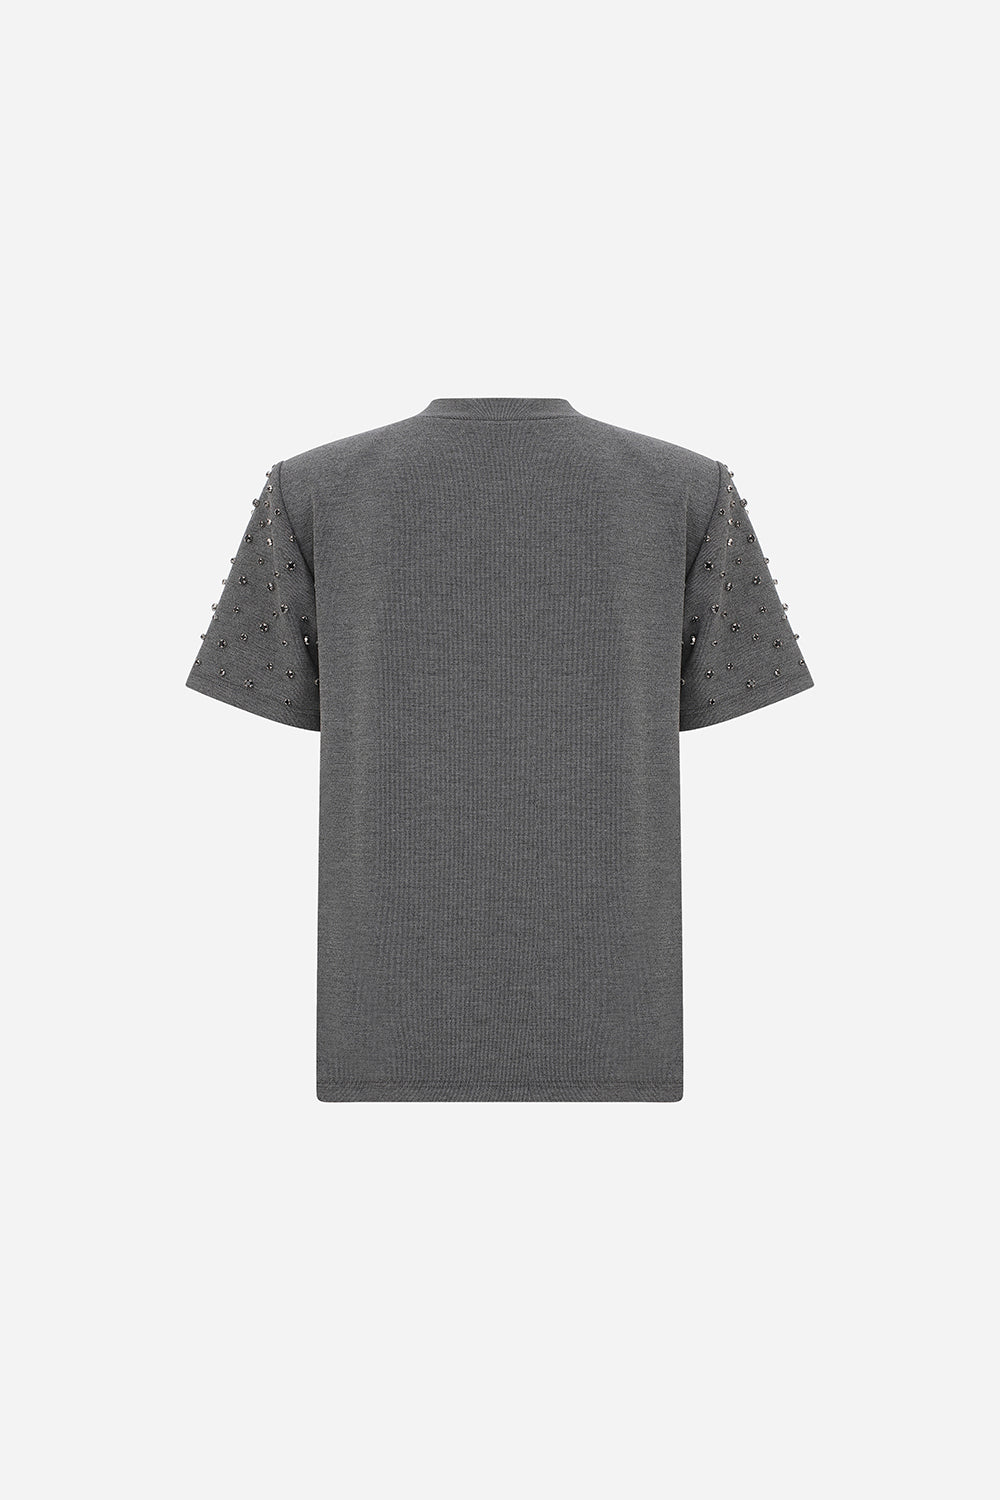 ARINA - EMBELLISHED TSHIRT WITH SHOULDER PADS in GREY